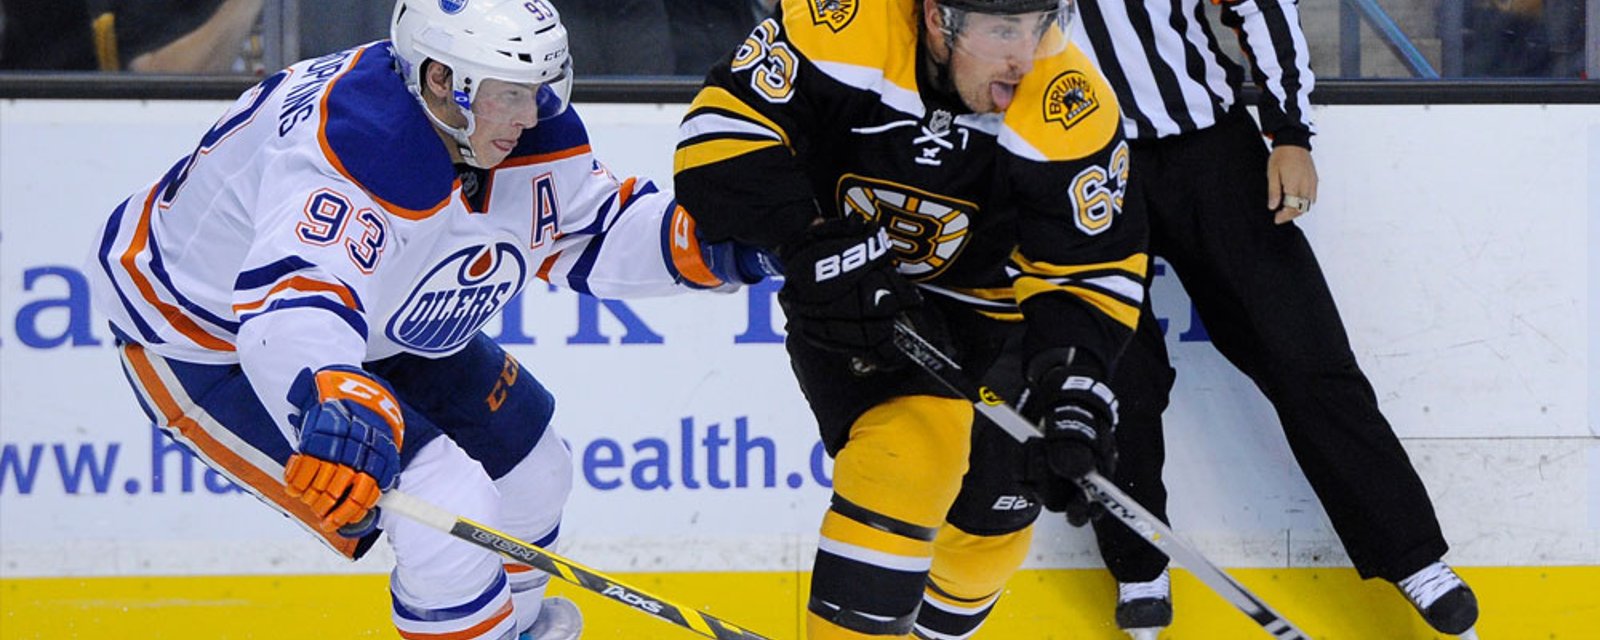 There is definitely something going on between the Bruins and Oilers! 